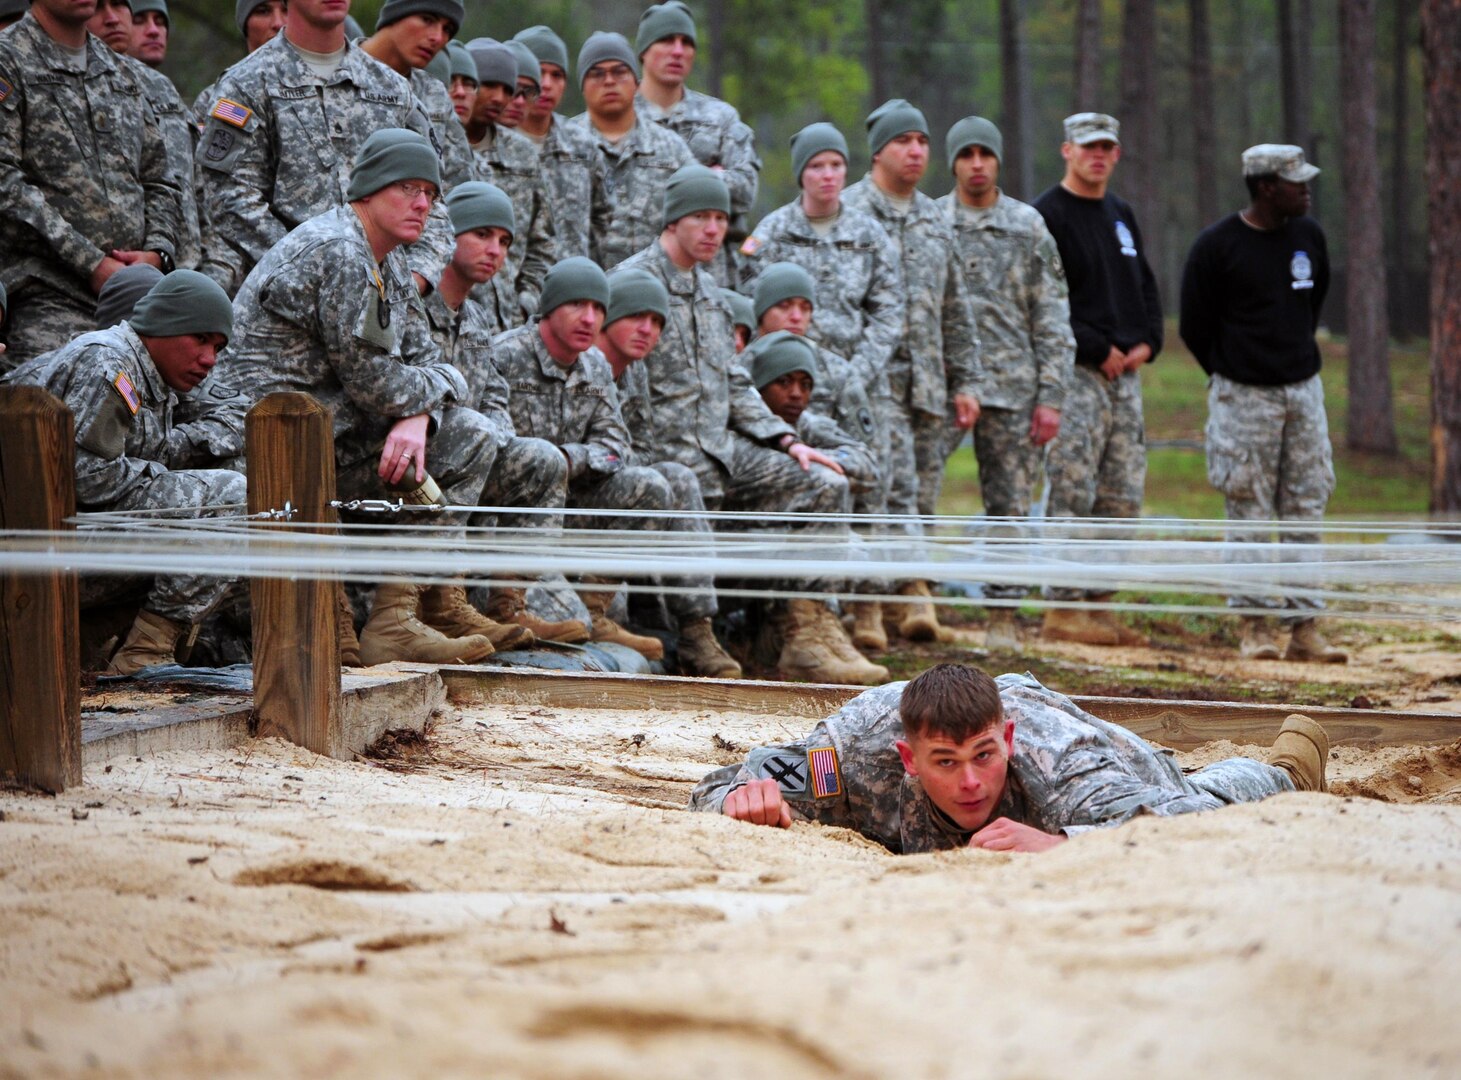 Army Cpt. Roswell McLarin of Fort Benning's Warrior Training Center demonstrates the low crawl to prospective students March 29,2011. (U.S. Army photo by Alexandra Hemmerly-Brown)